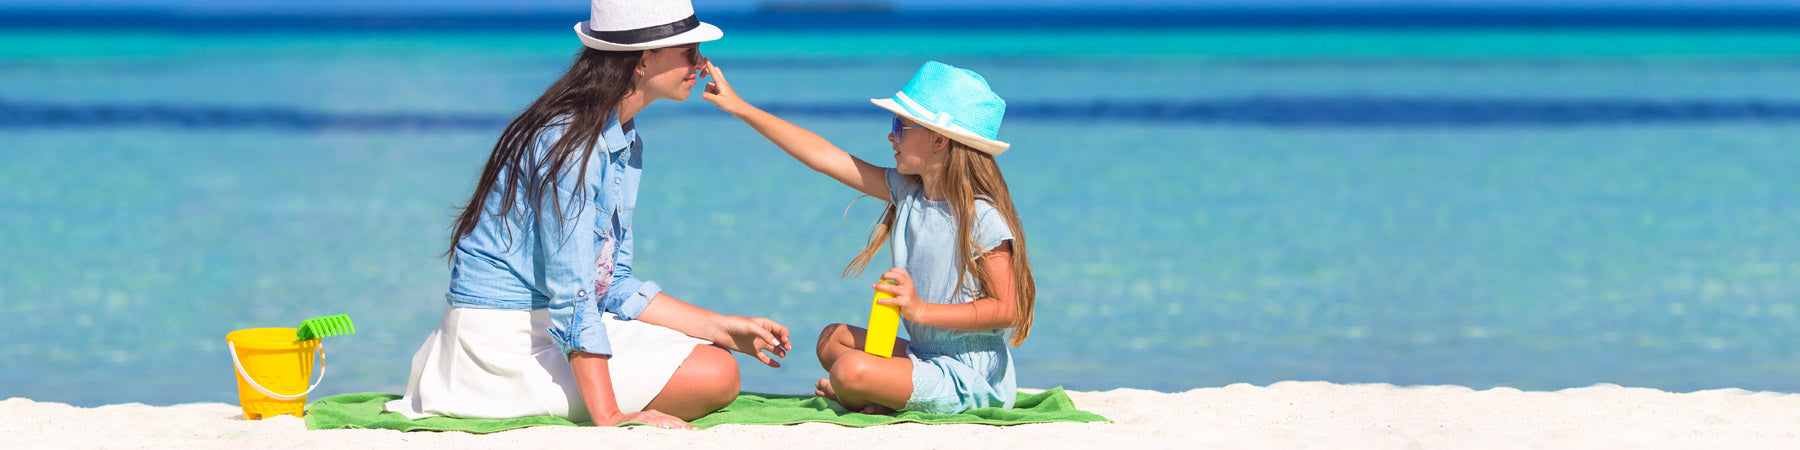 Mother and daughter at beach applying natural sunscreen with Manuka Honey - Aftersun skincare